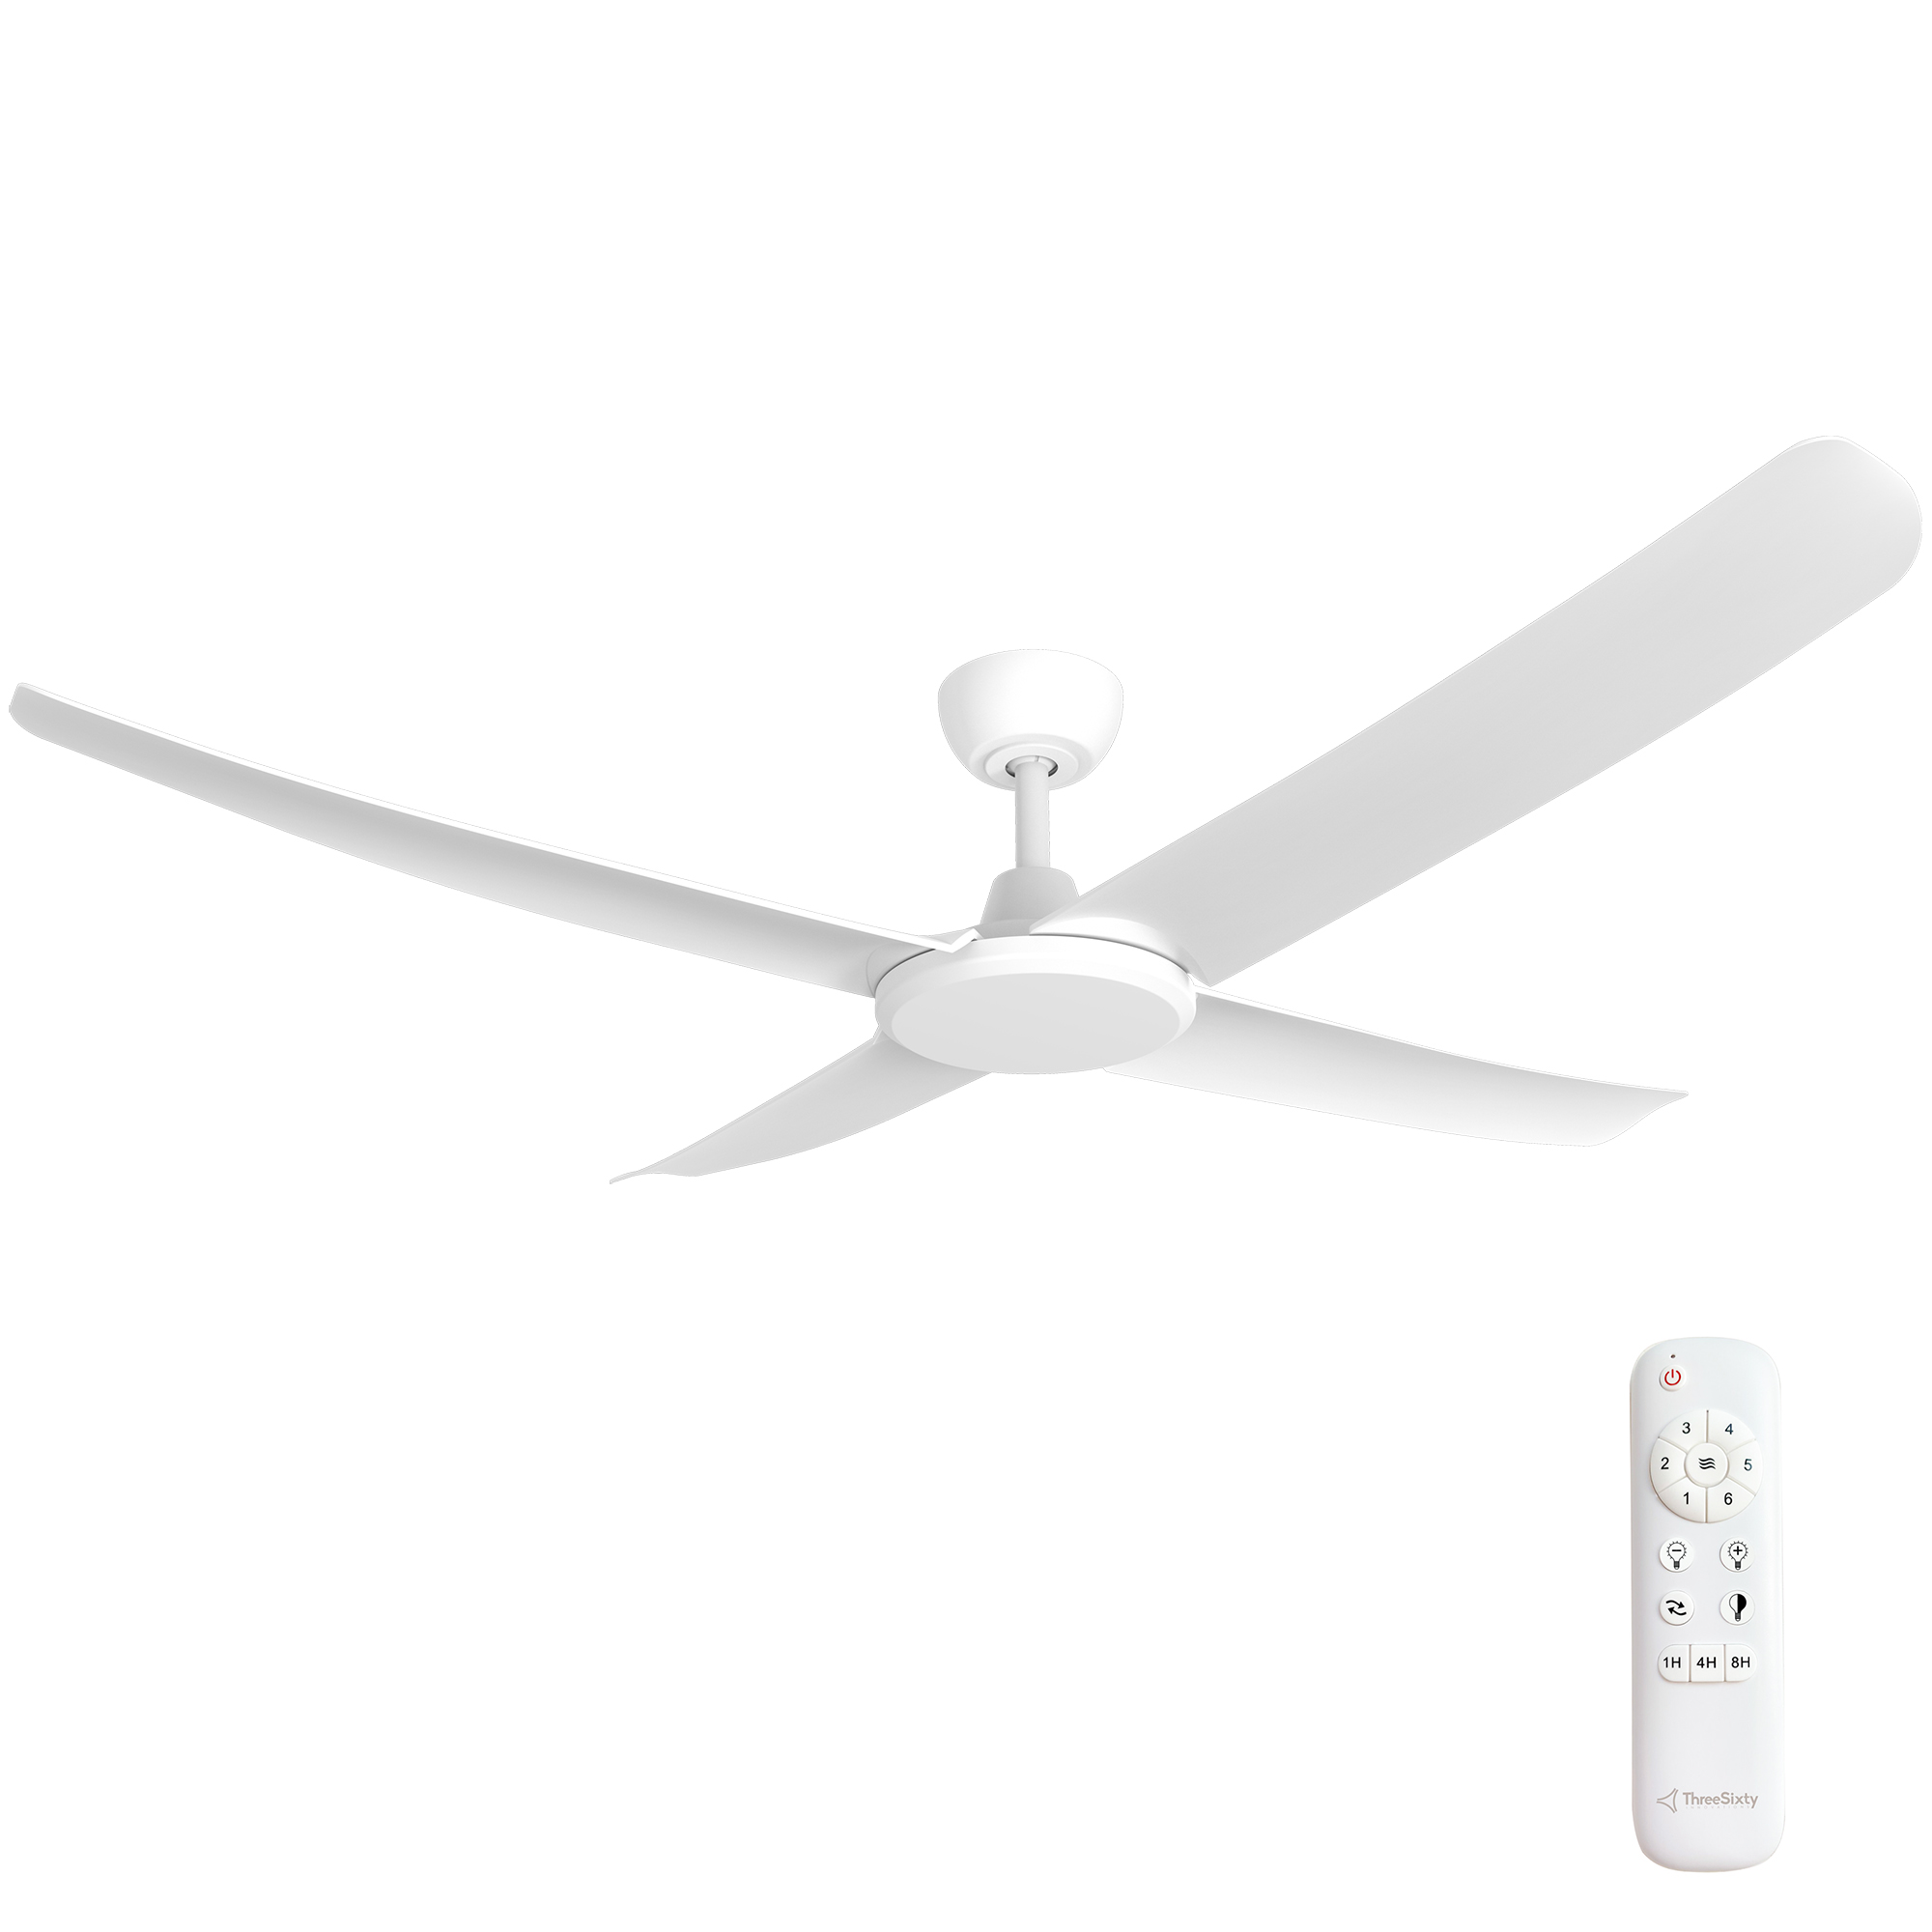 56" FlatJET DC Ceiling Fan in White with Remote Control